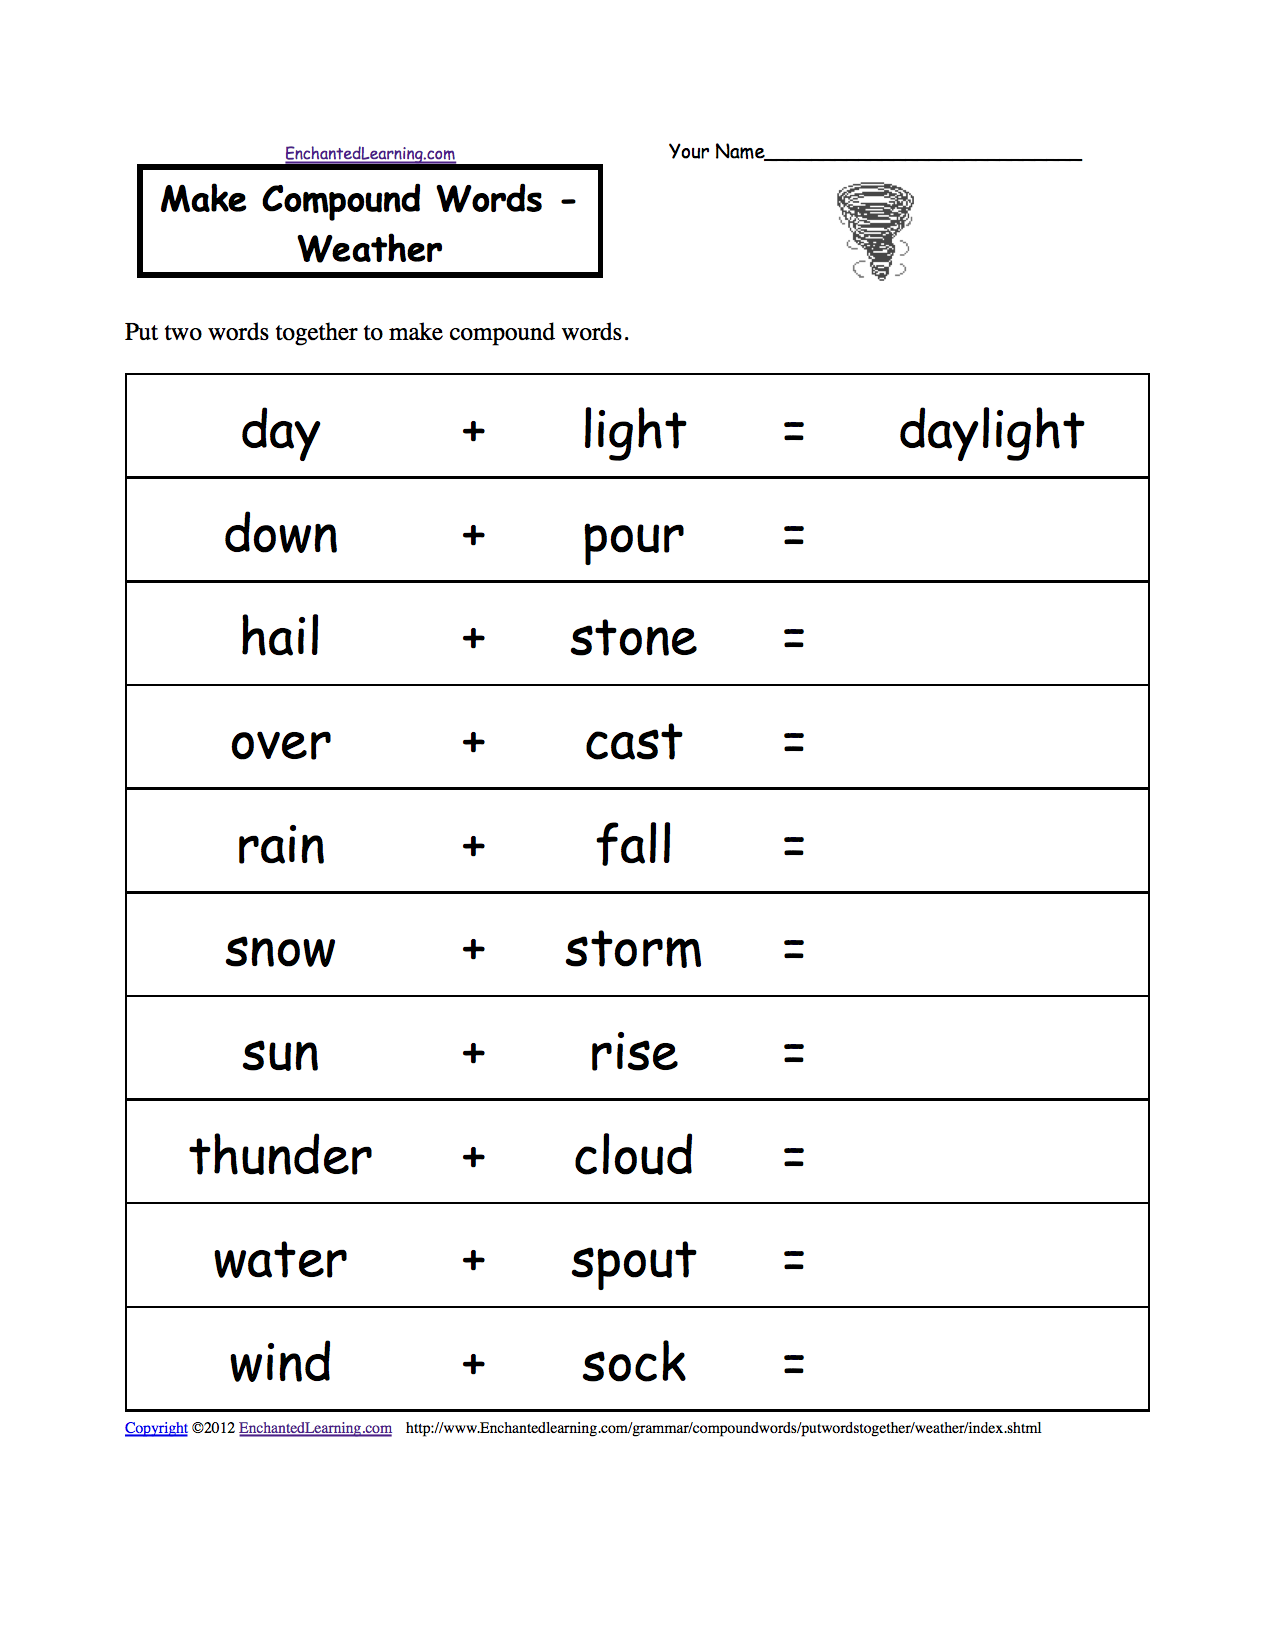 pdf Worksheets   and Weather worksheet  at Spelling weather Activities Related